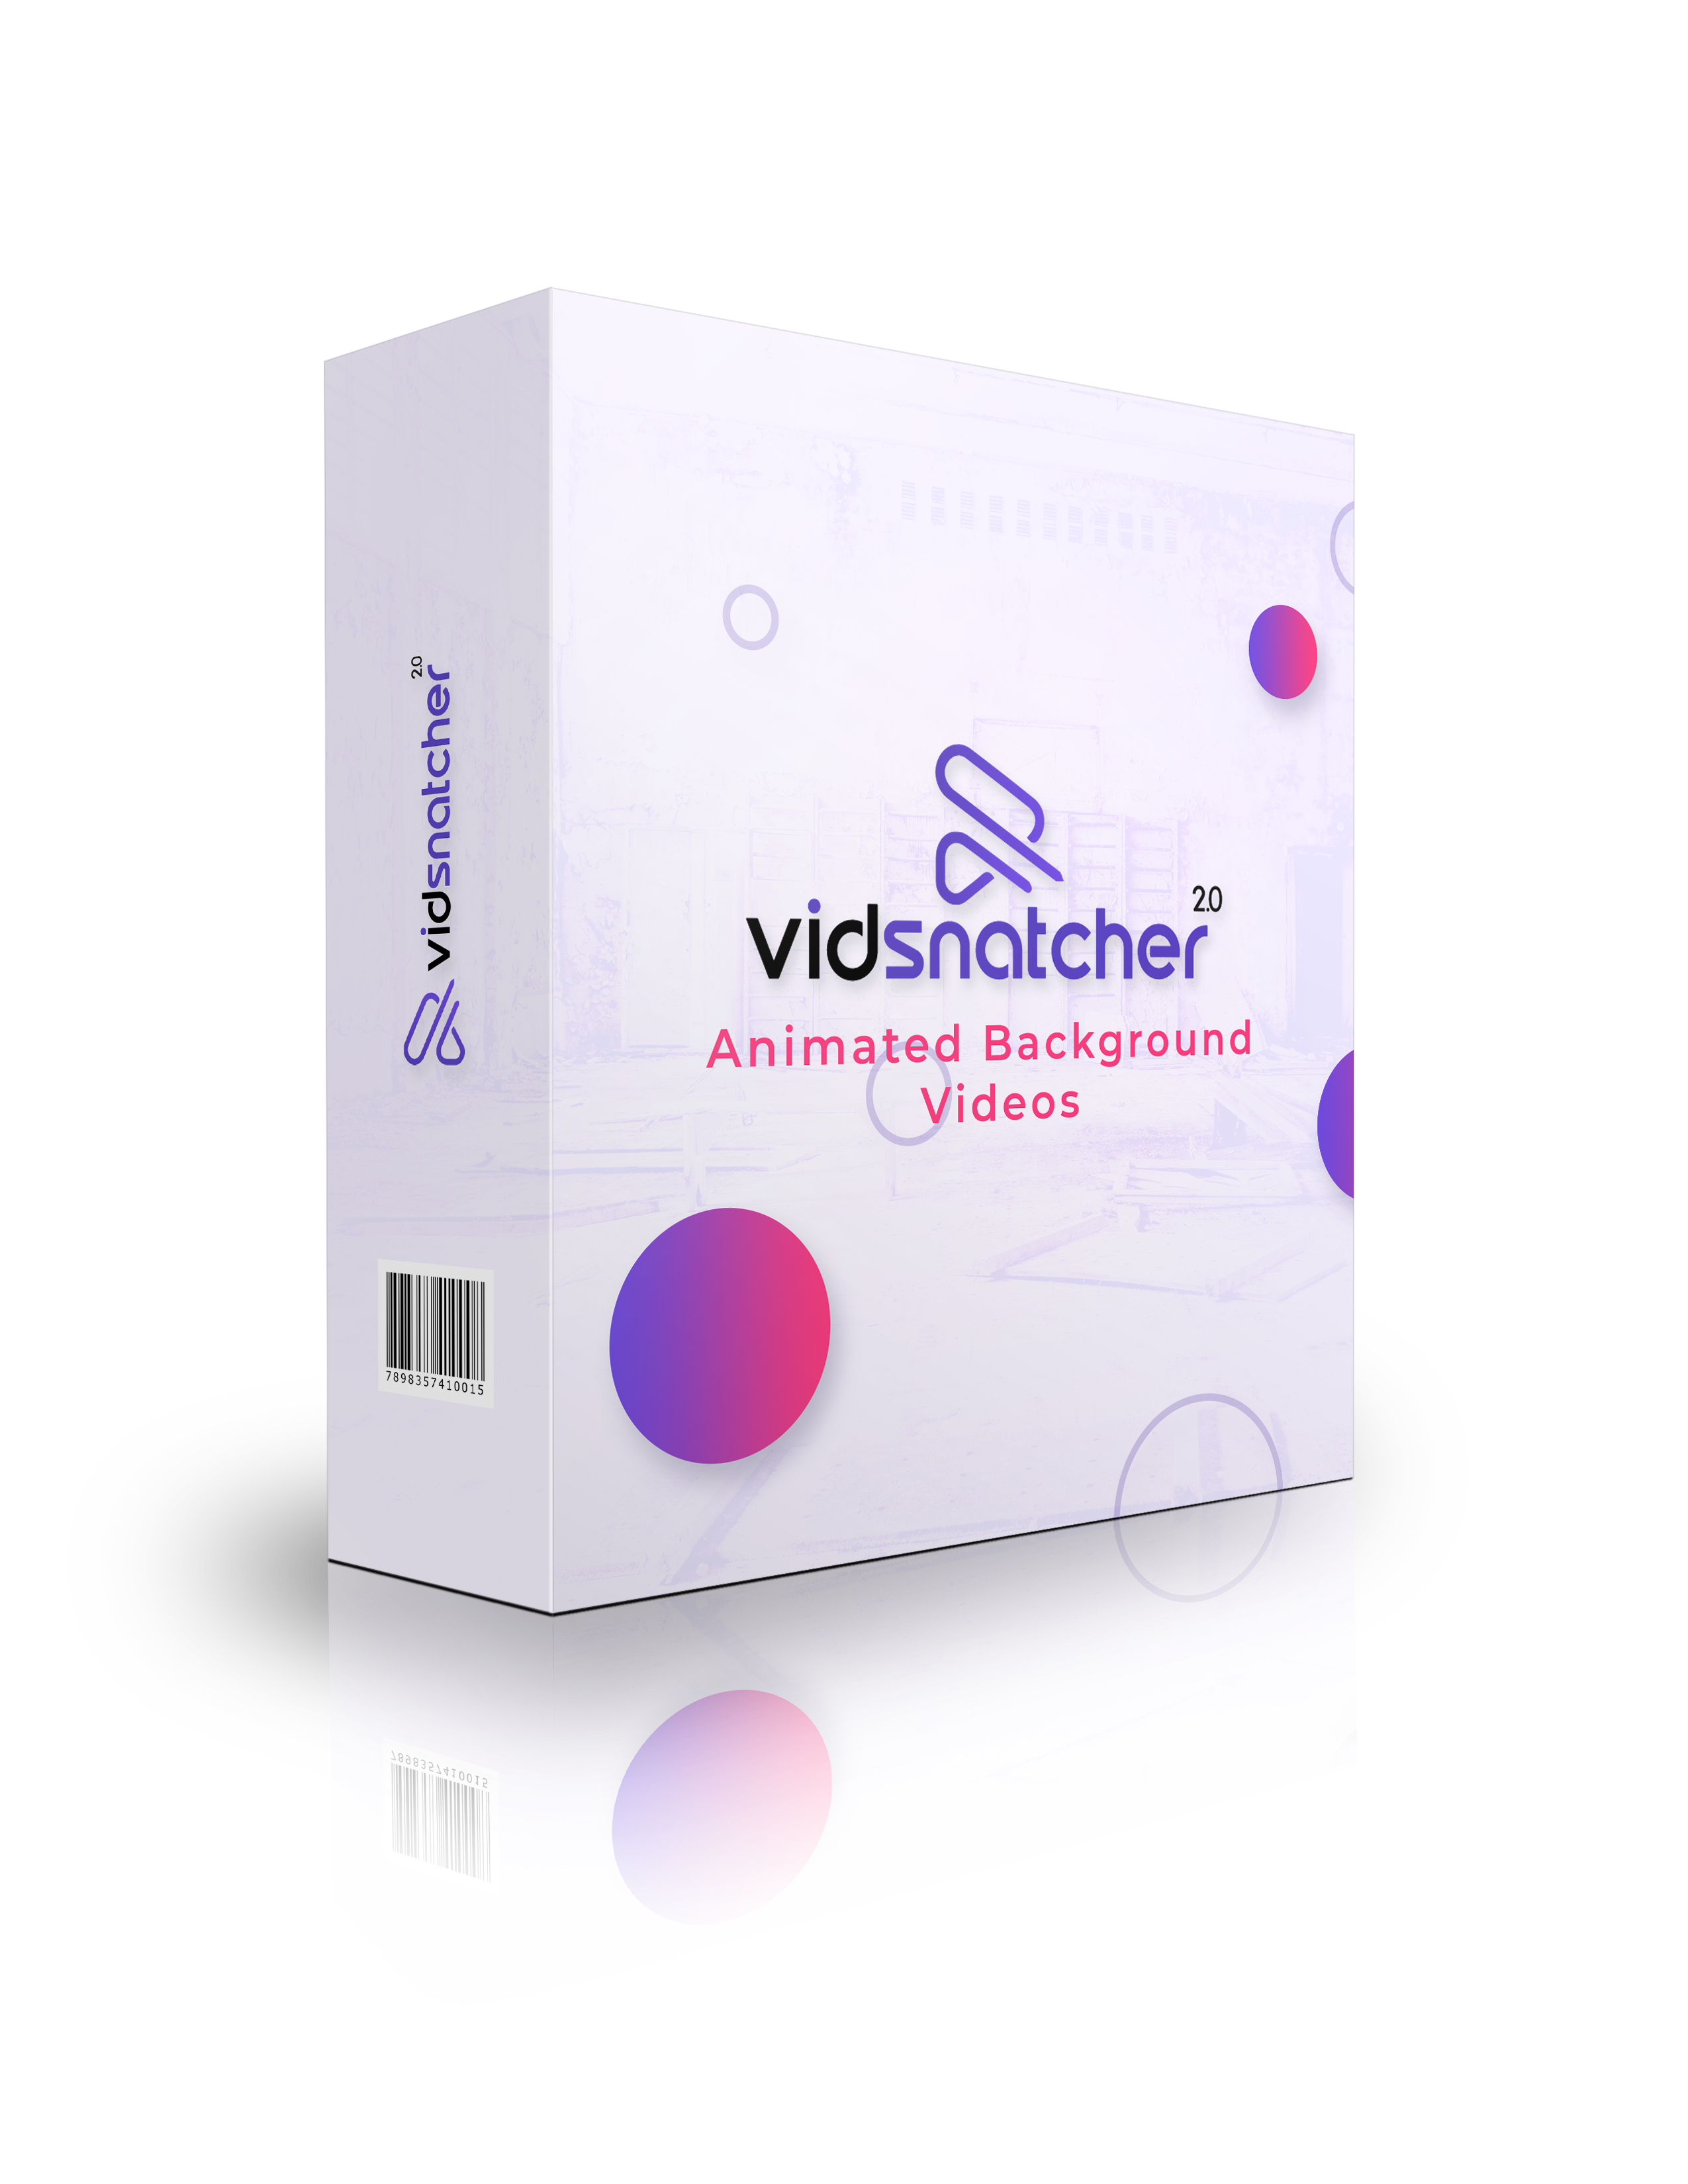 VidSnatcher 2.0 Honest Review | OTO Details + $3K Bonuses + Launch Discount Offer - The BEST Cloud-Based Video Editor With Mobile Recording & Screen Capture